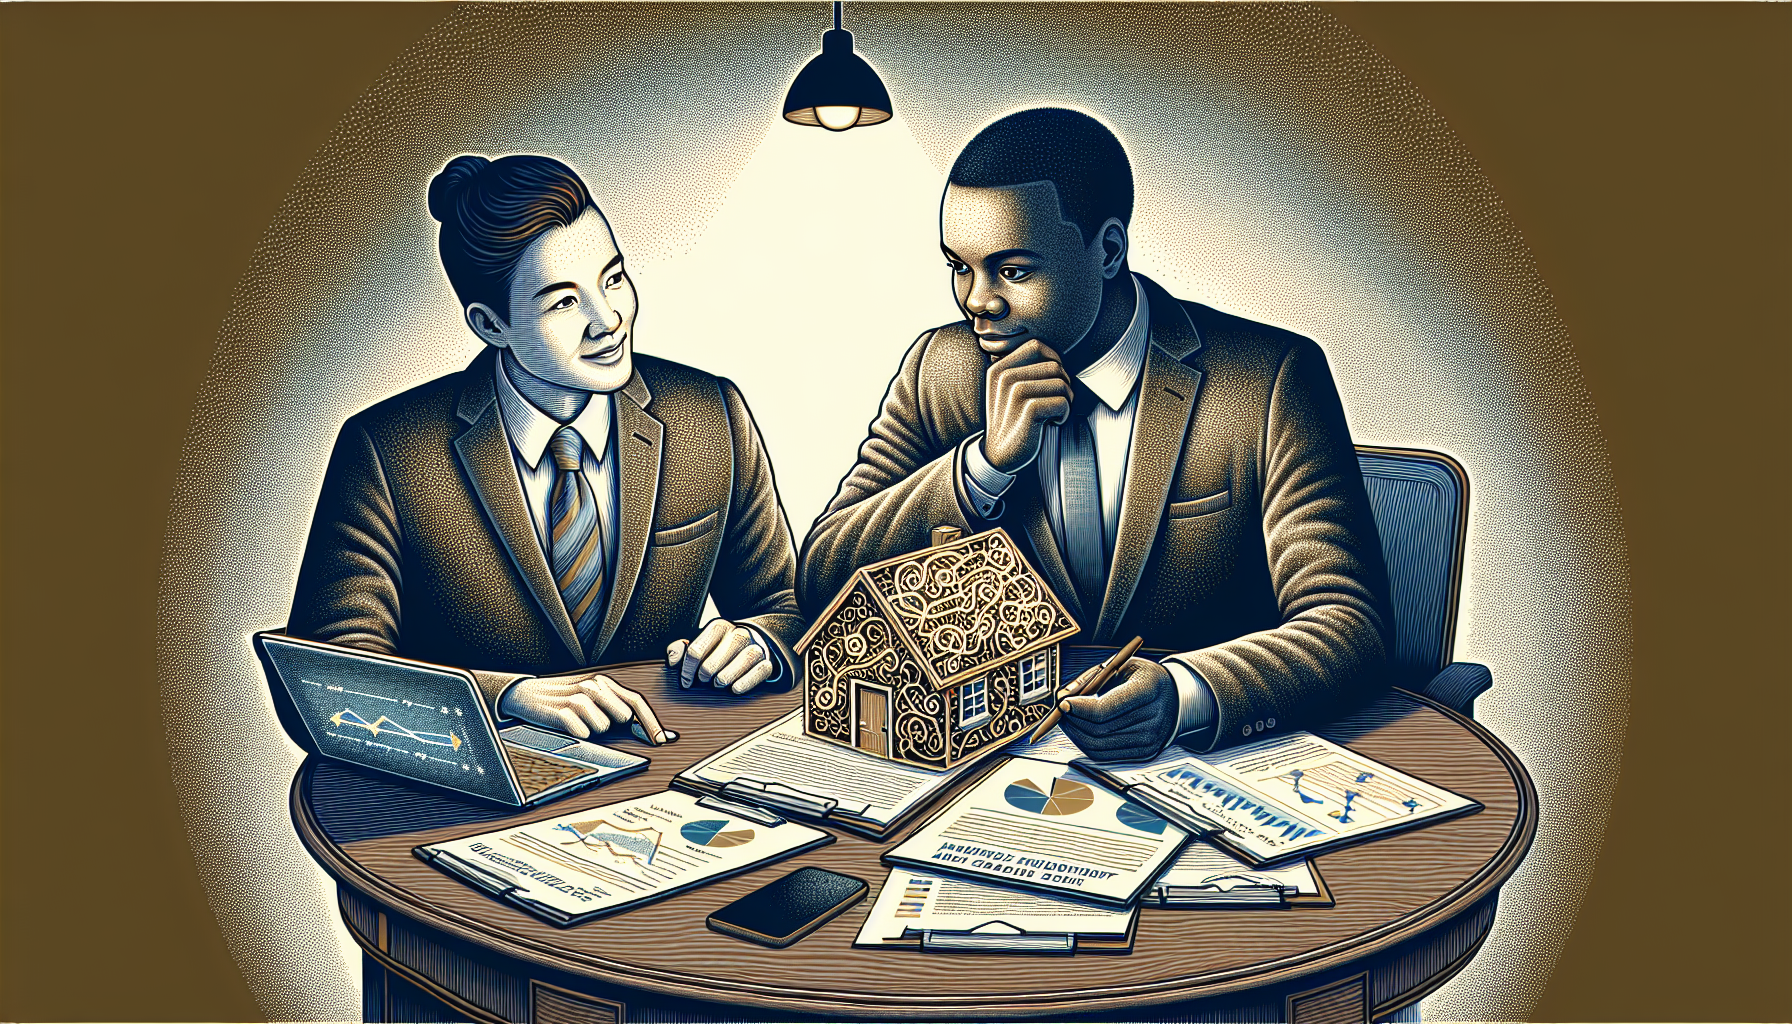 Illustration of a mortgage broker guiding a client through the initial consultation and documentation process